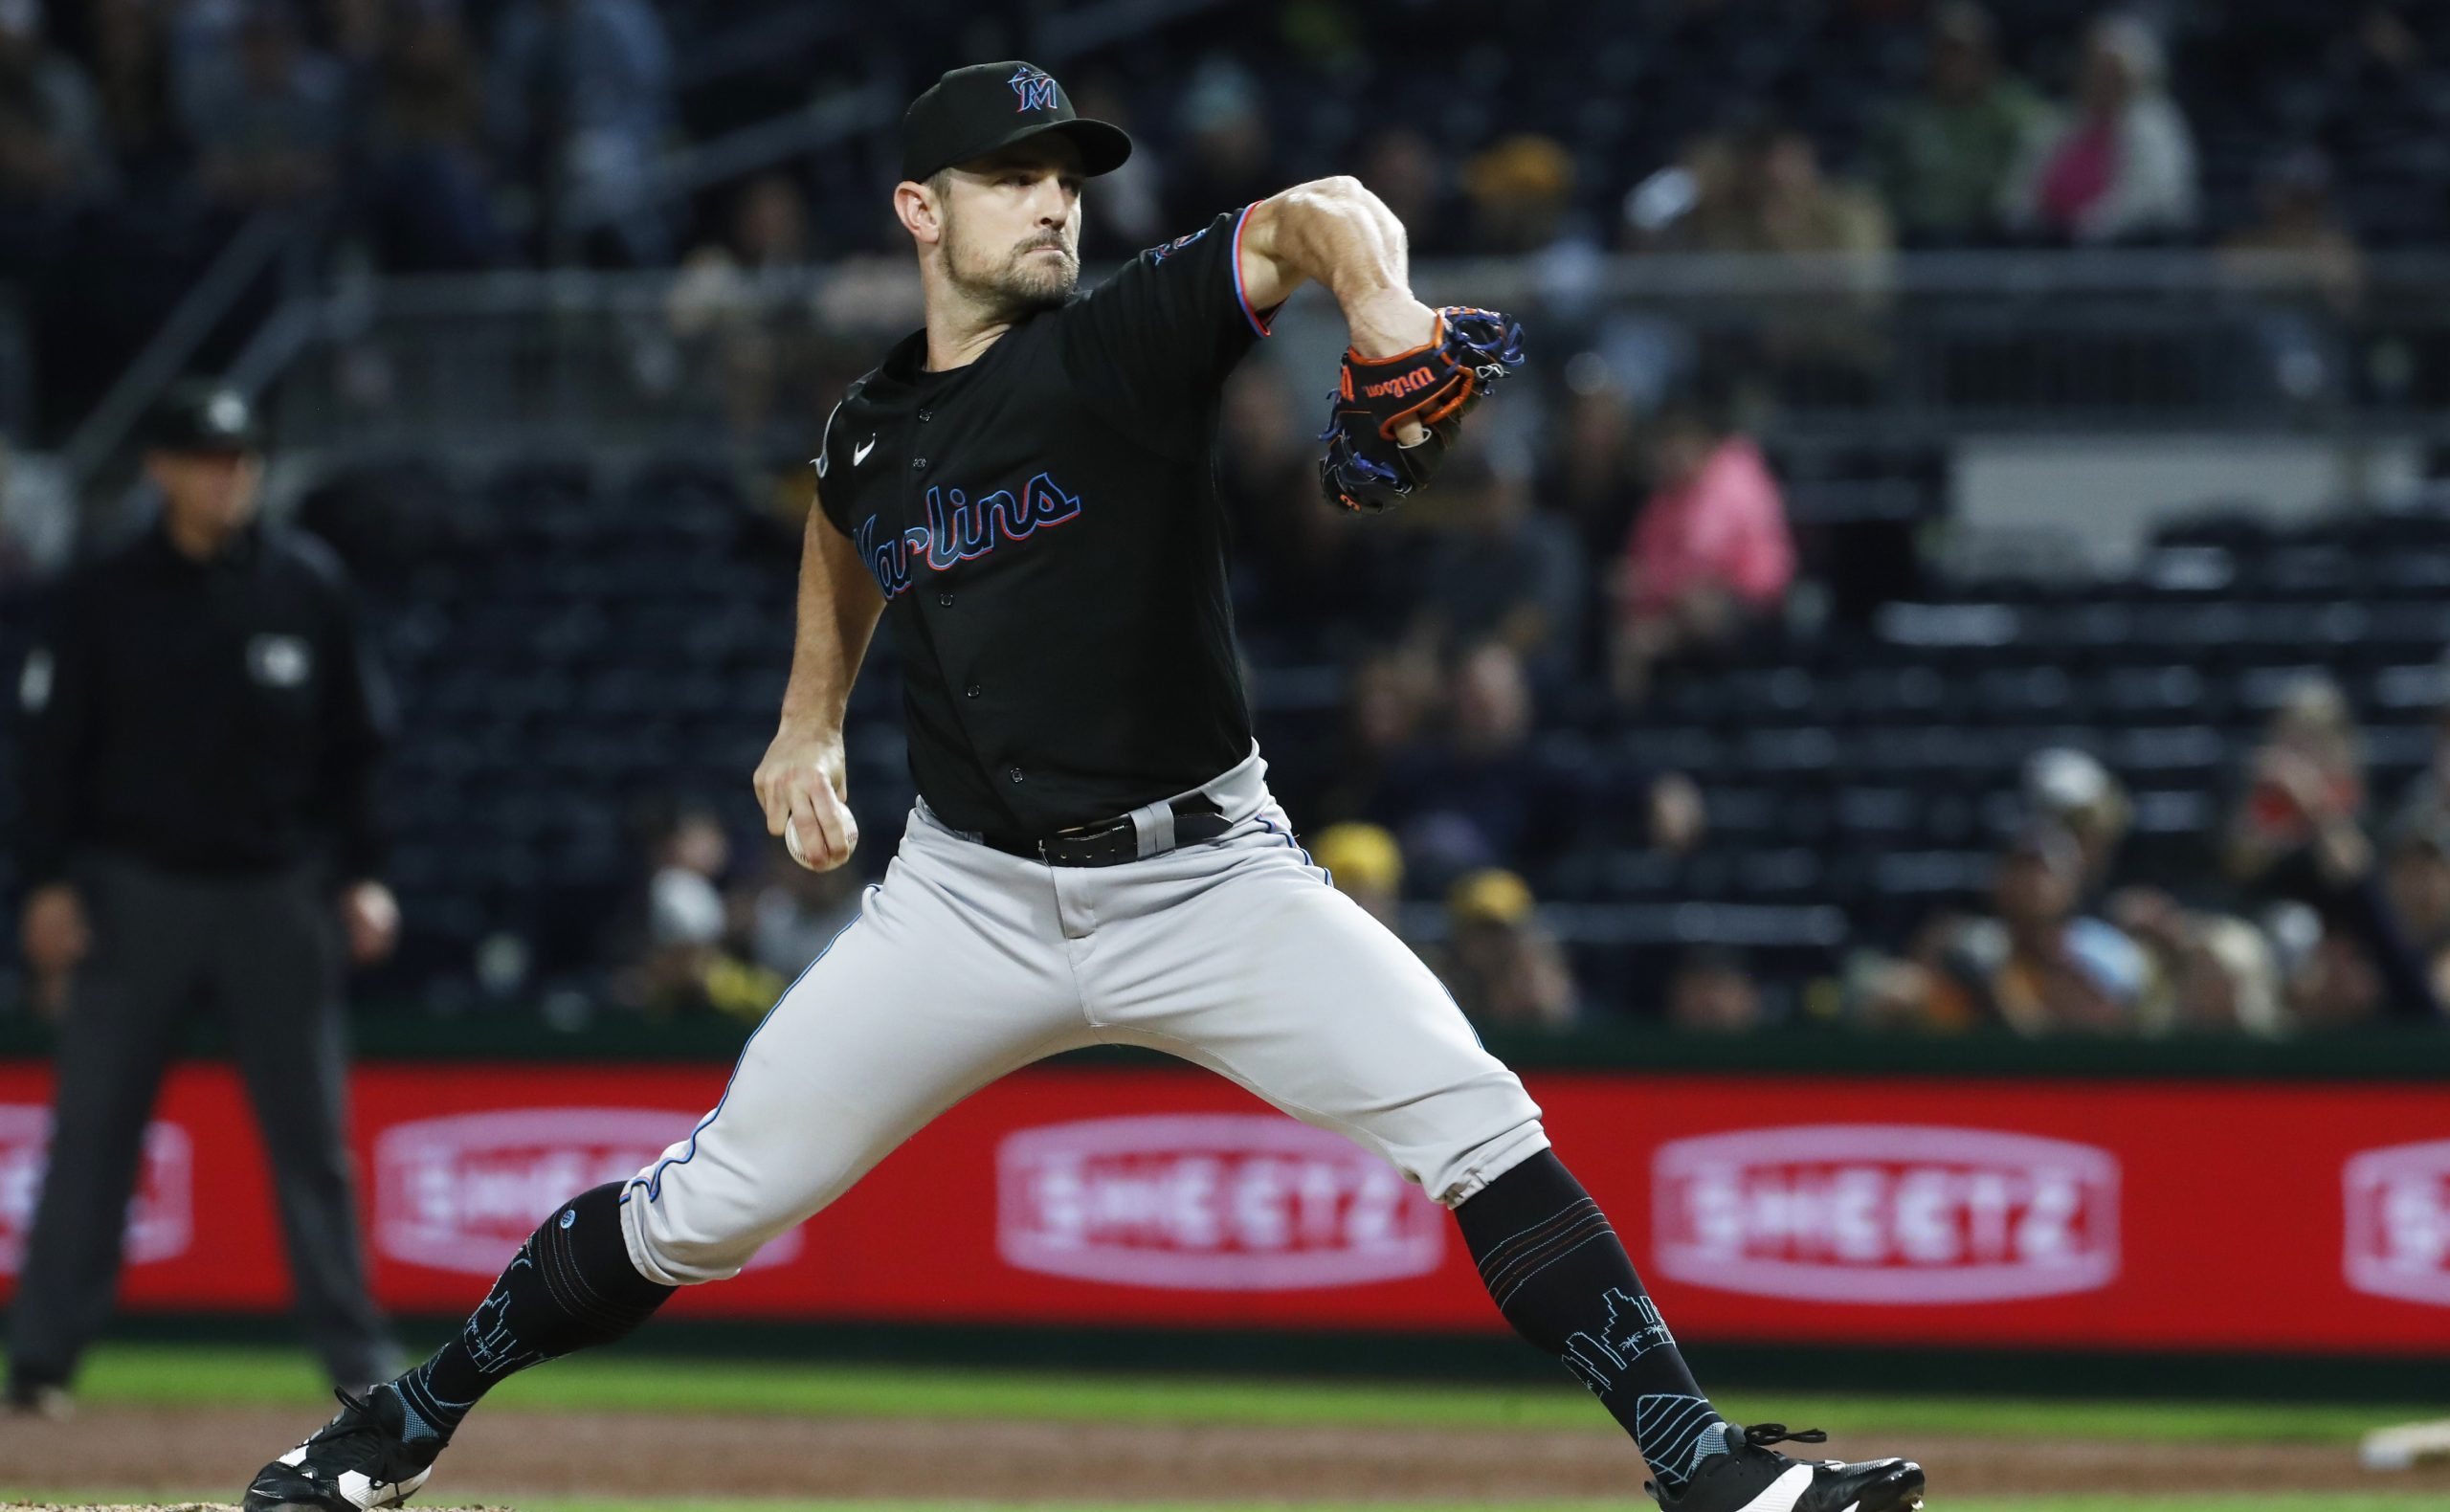 The Rangers added relief pitcher David Robertson to their bullpen on Thursday. Robertson pitched for the Mets and Marlins in 2023. Photo Credit: Charles LeClaire-USA TODAY Sports